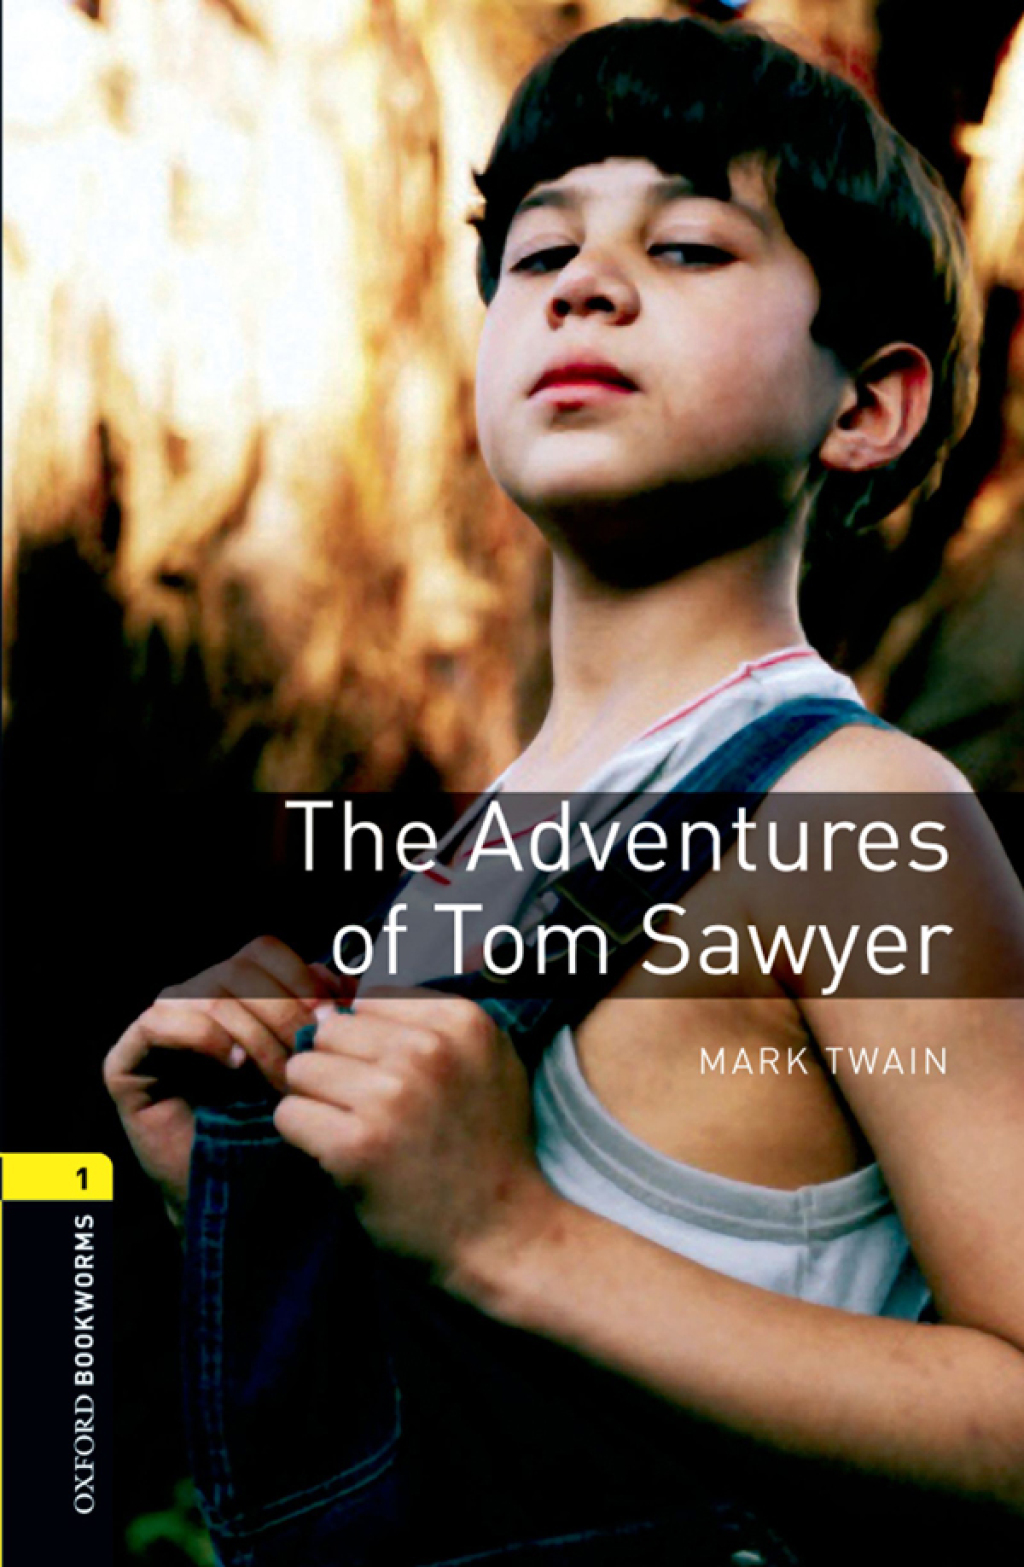 The Adventures of Tom Sawyer Level 1 Oxford Bookworms Library - 3rd Edition (eBook Rental)